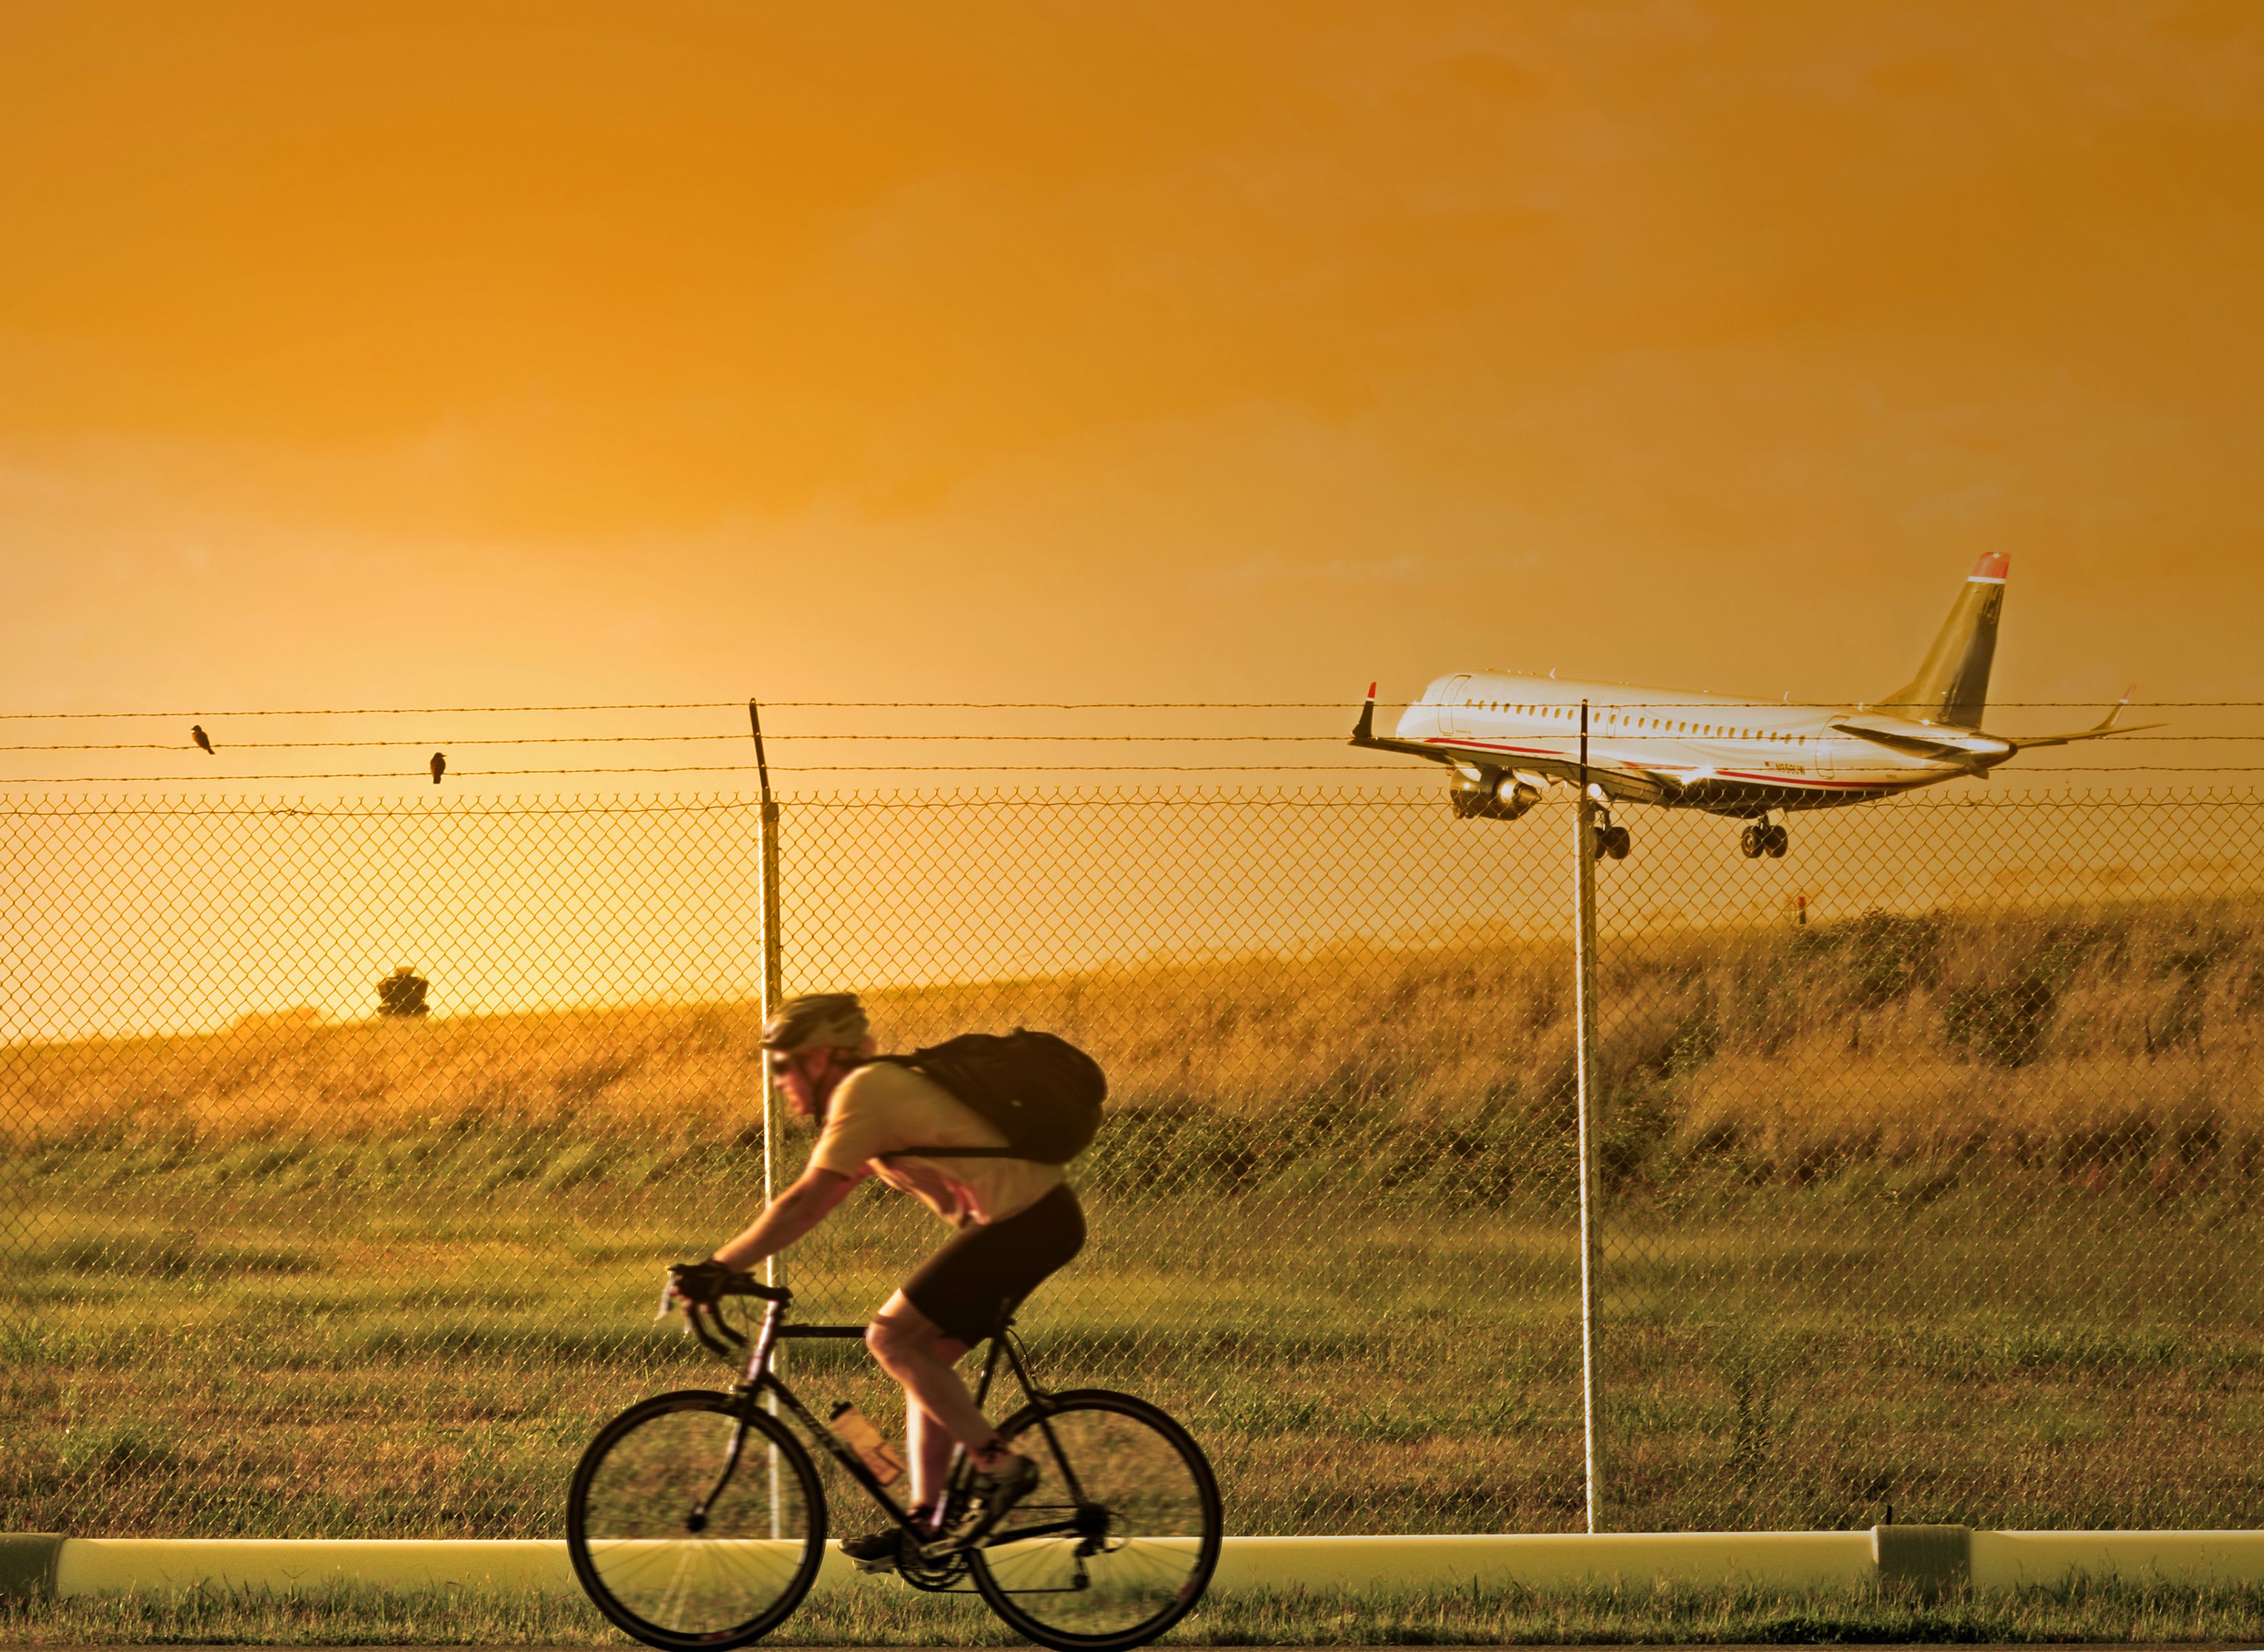 Someone riding a bike near an airport as an aircraft comes in to land.